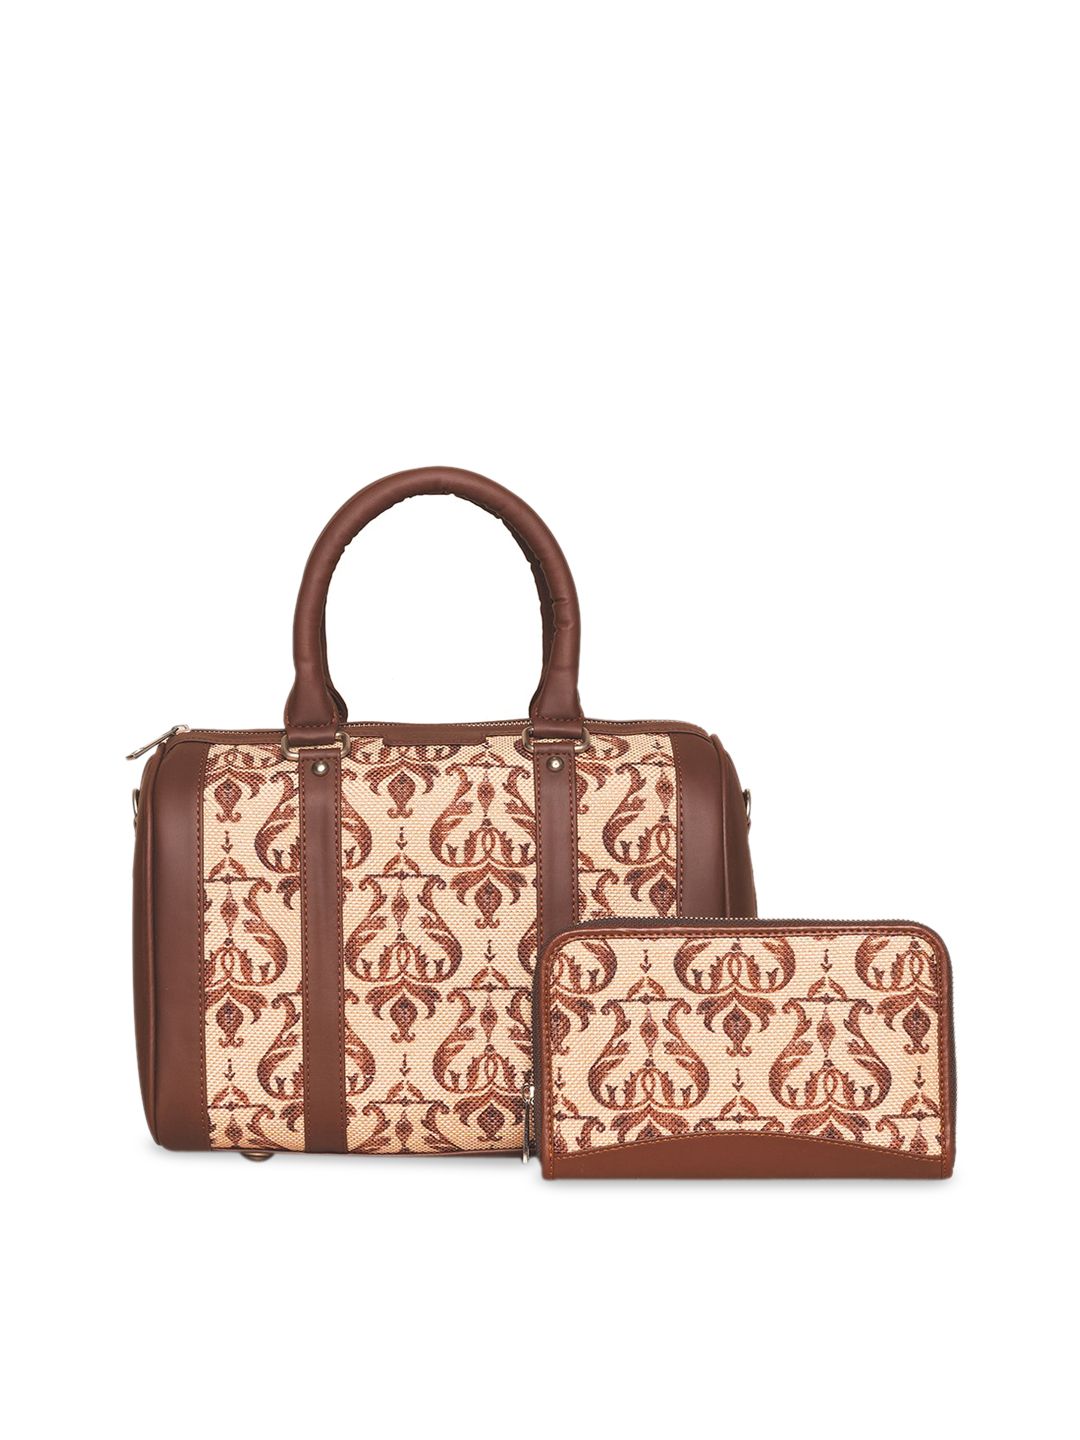 ZOUK Brown Ethnic Motifs Printed Structured Handheld Bag with Fringed Price in India